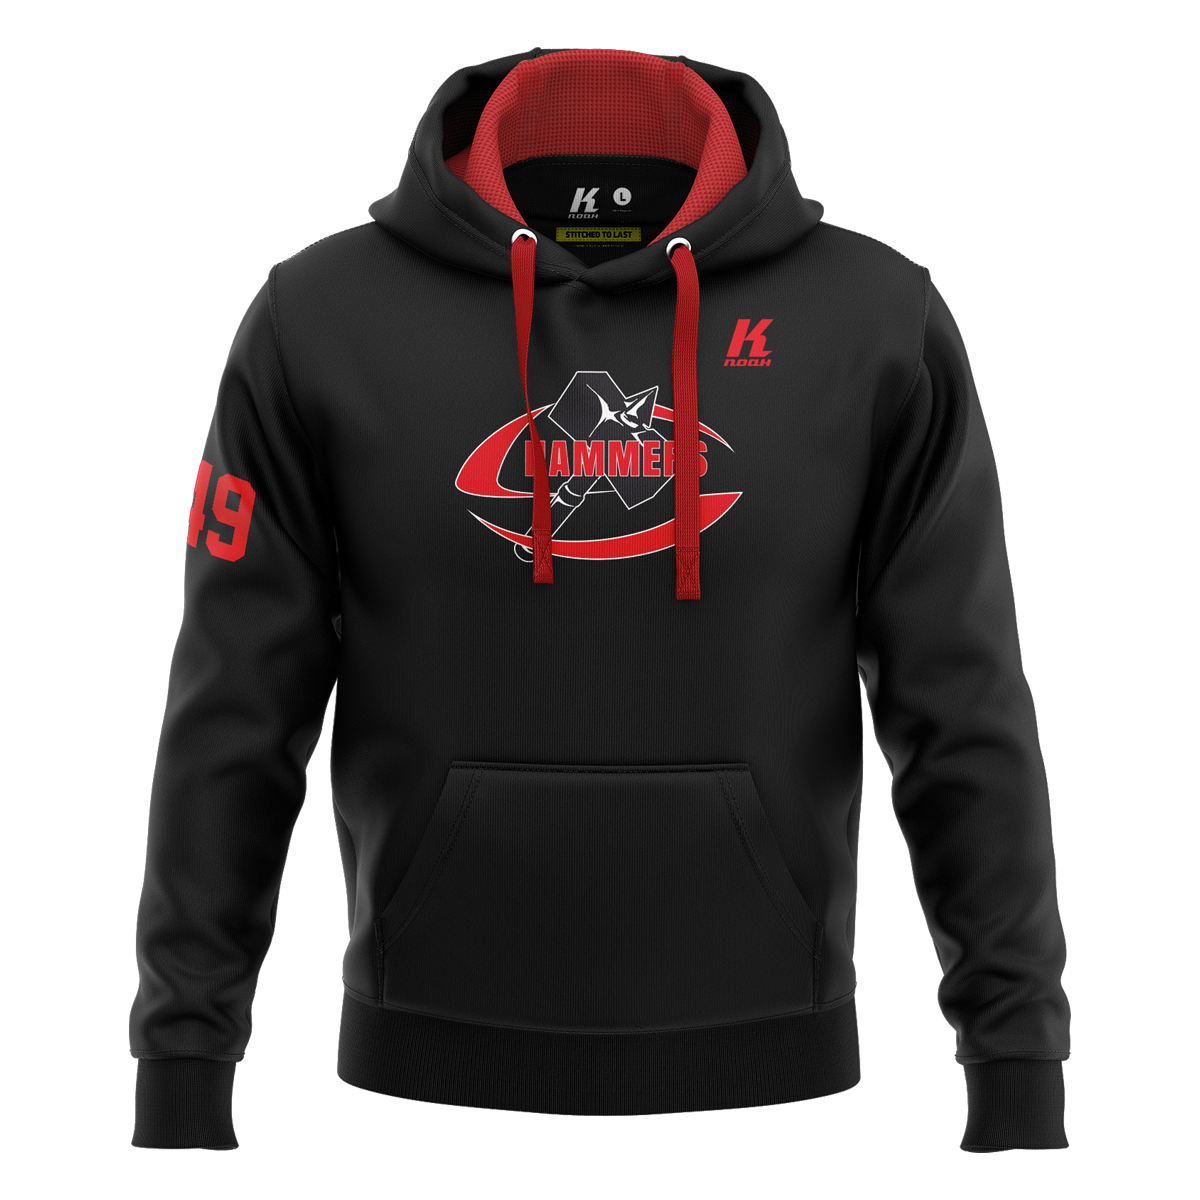 S-Hammers Varsity Hoodie Essential with Playernumber/Initials